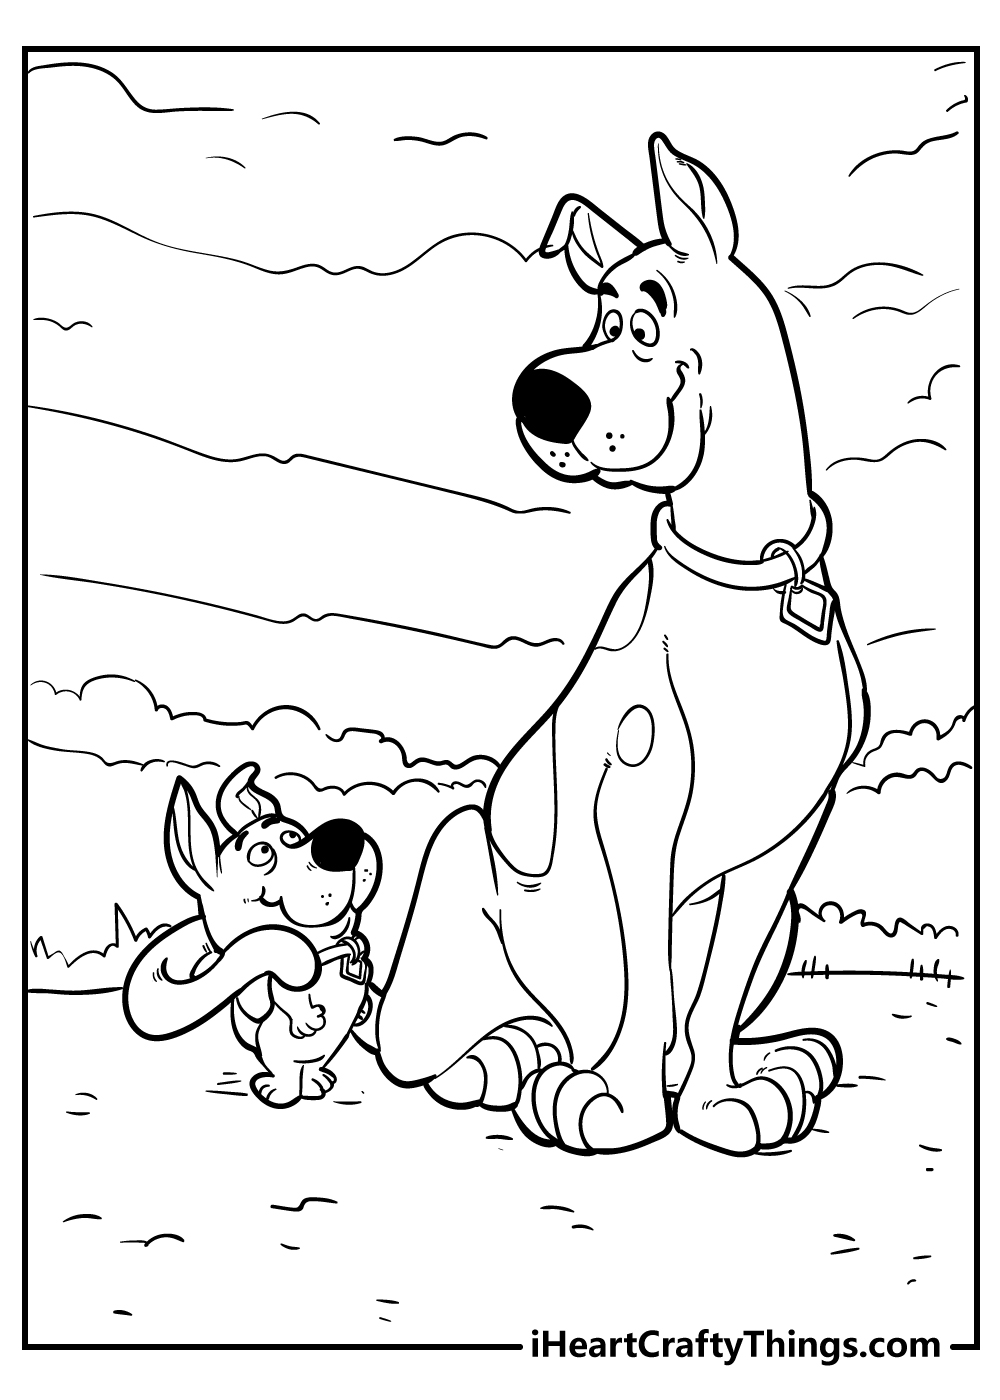 scooby doo and scrappy doo coloring pages free printable